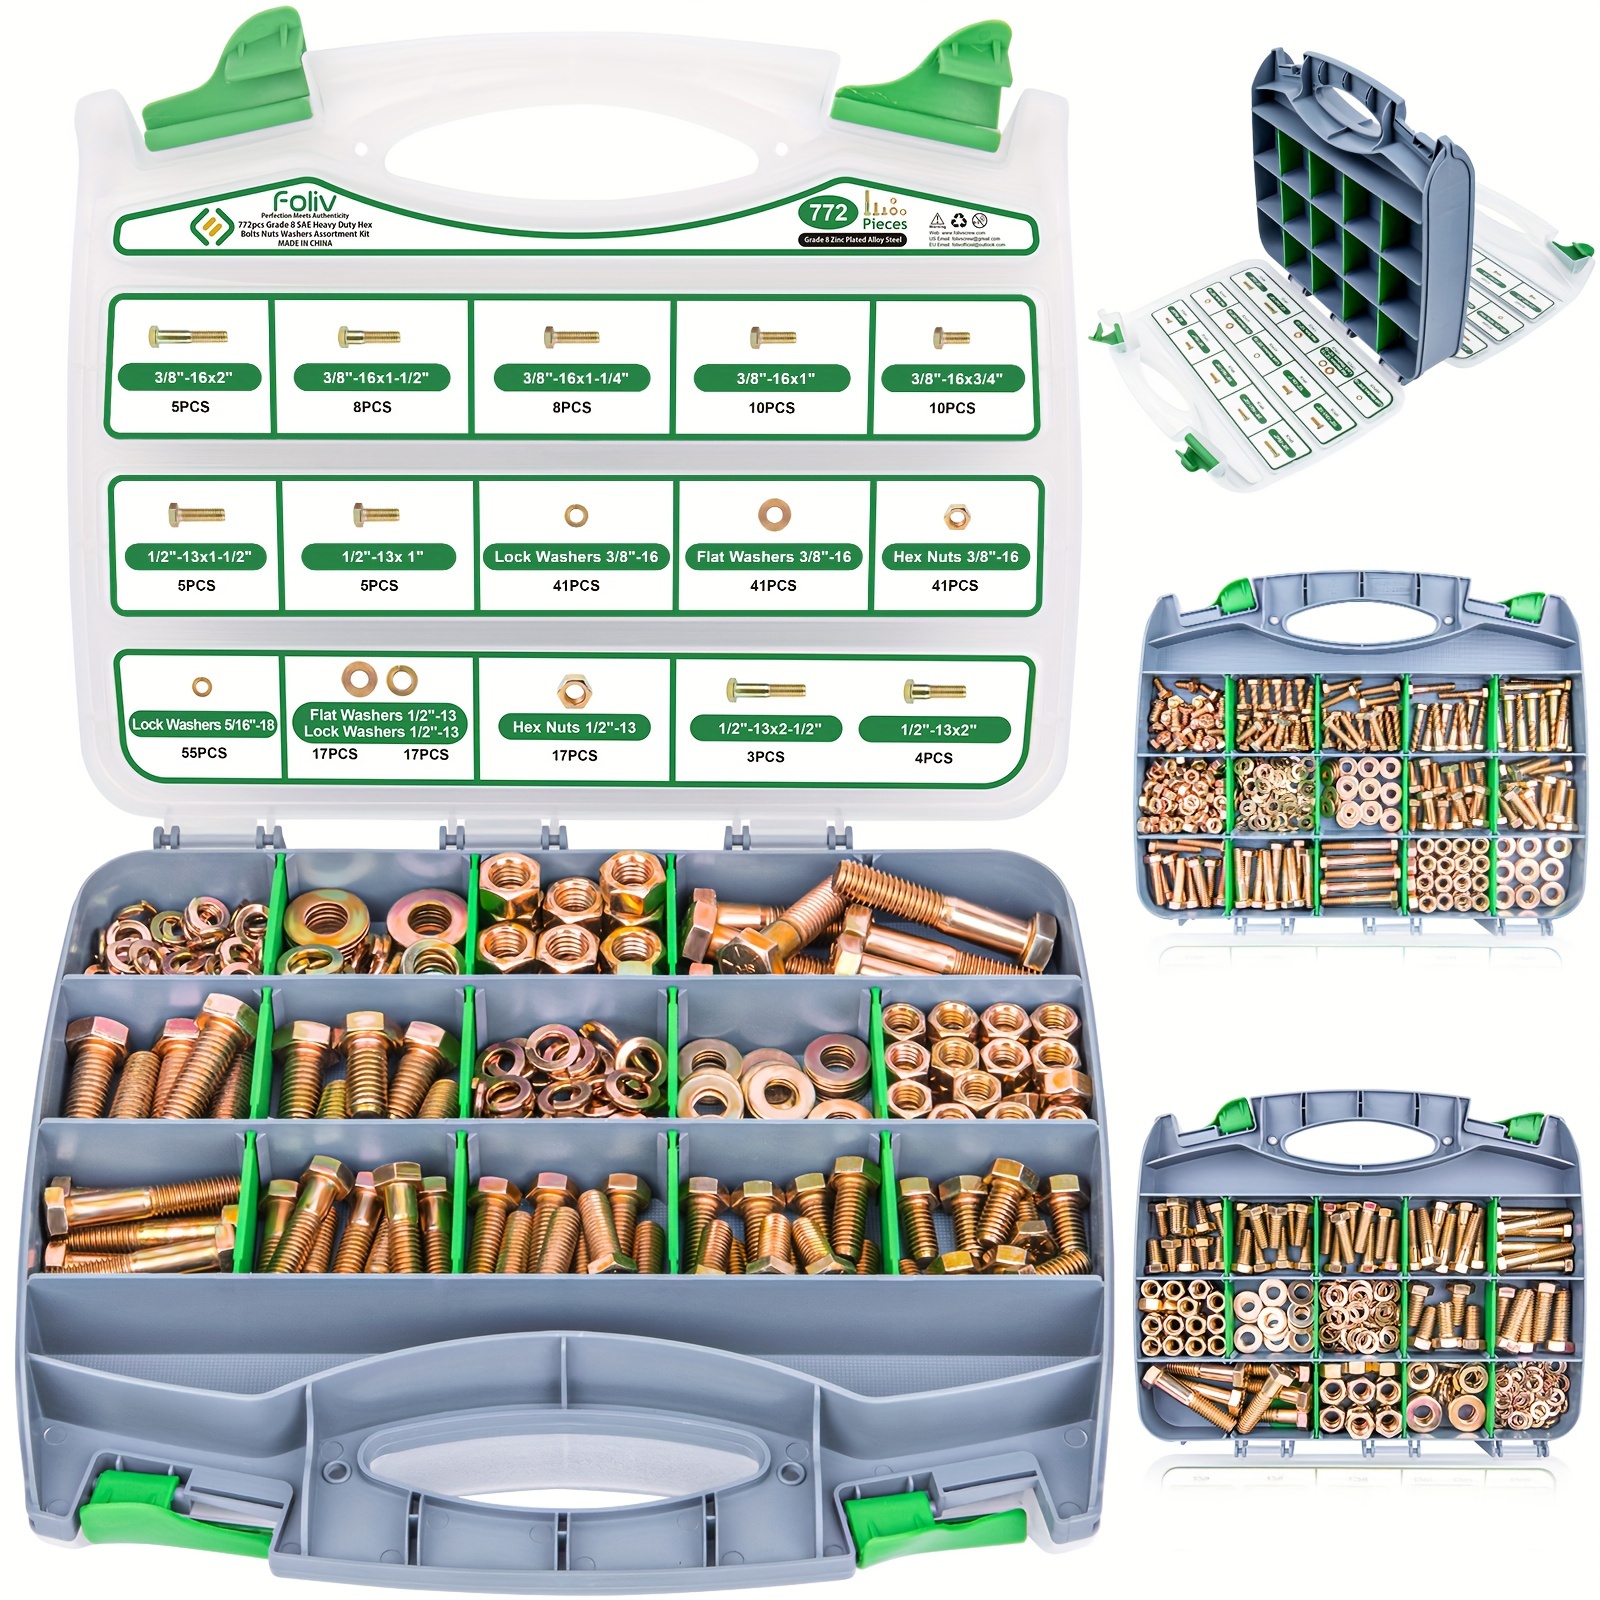 

772pcs Grade 8 Bolt Assortment Kit, Heavy Duty Bolts And Nuts Kit, 1/4-20 5/16-18 3/8-16 1/2-13 Sae Sizes Included (upgraded Package)